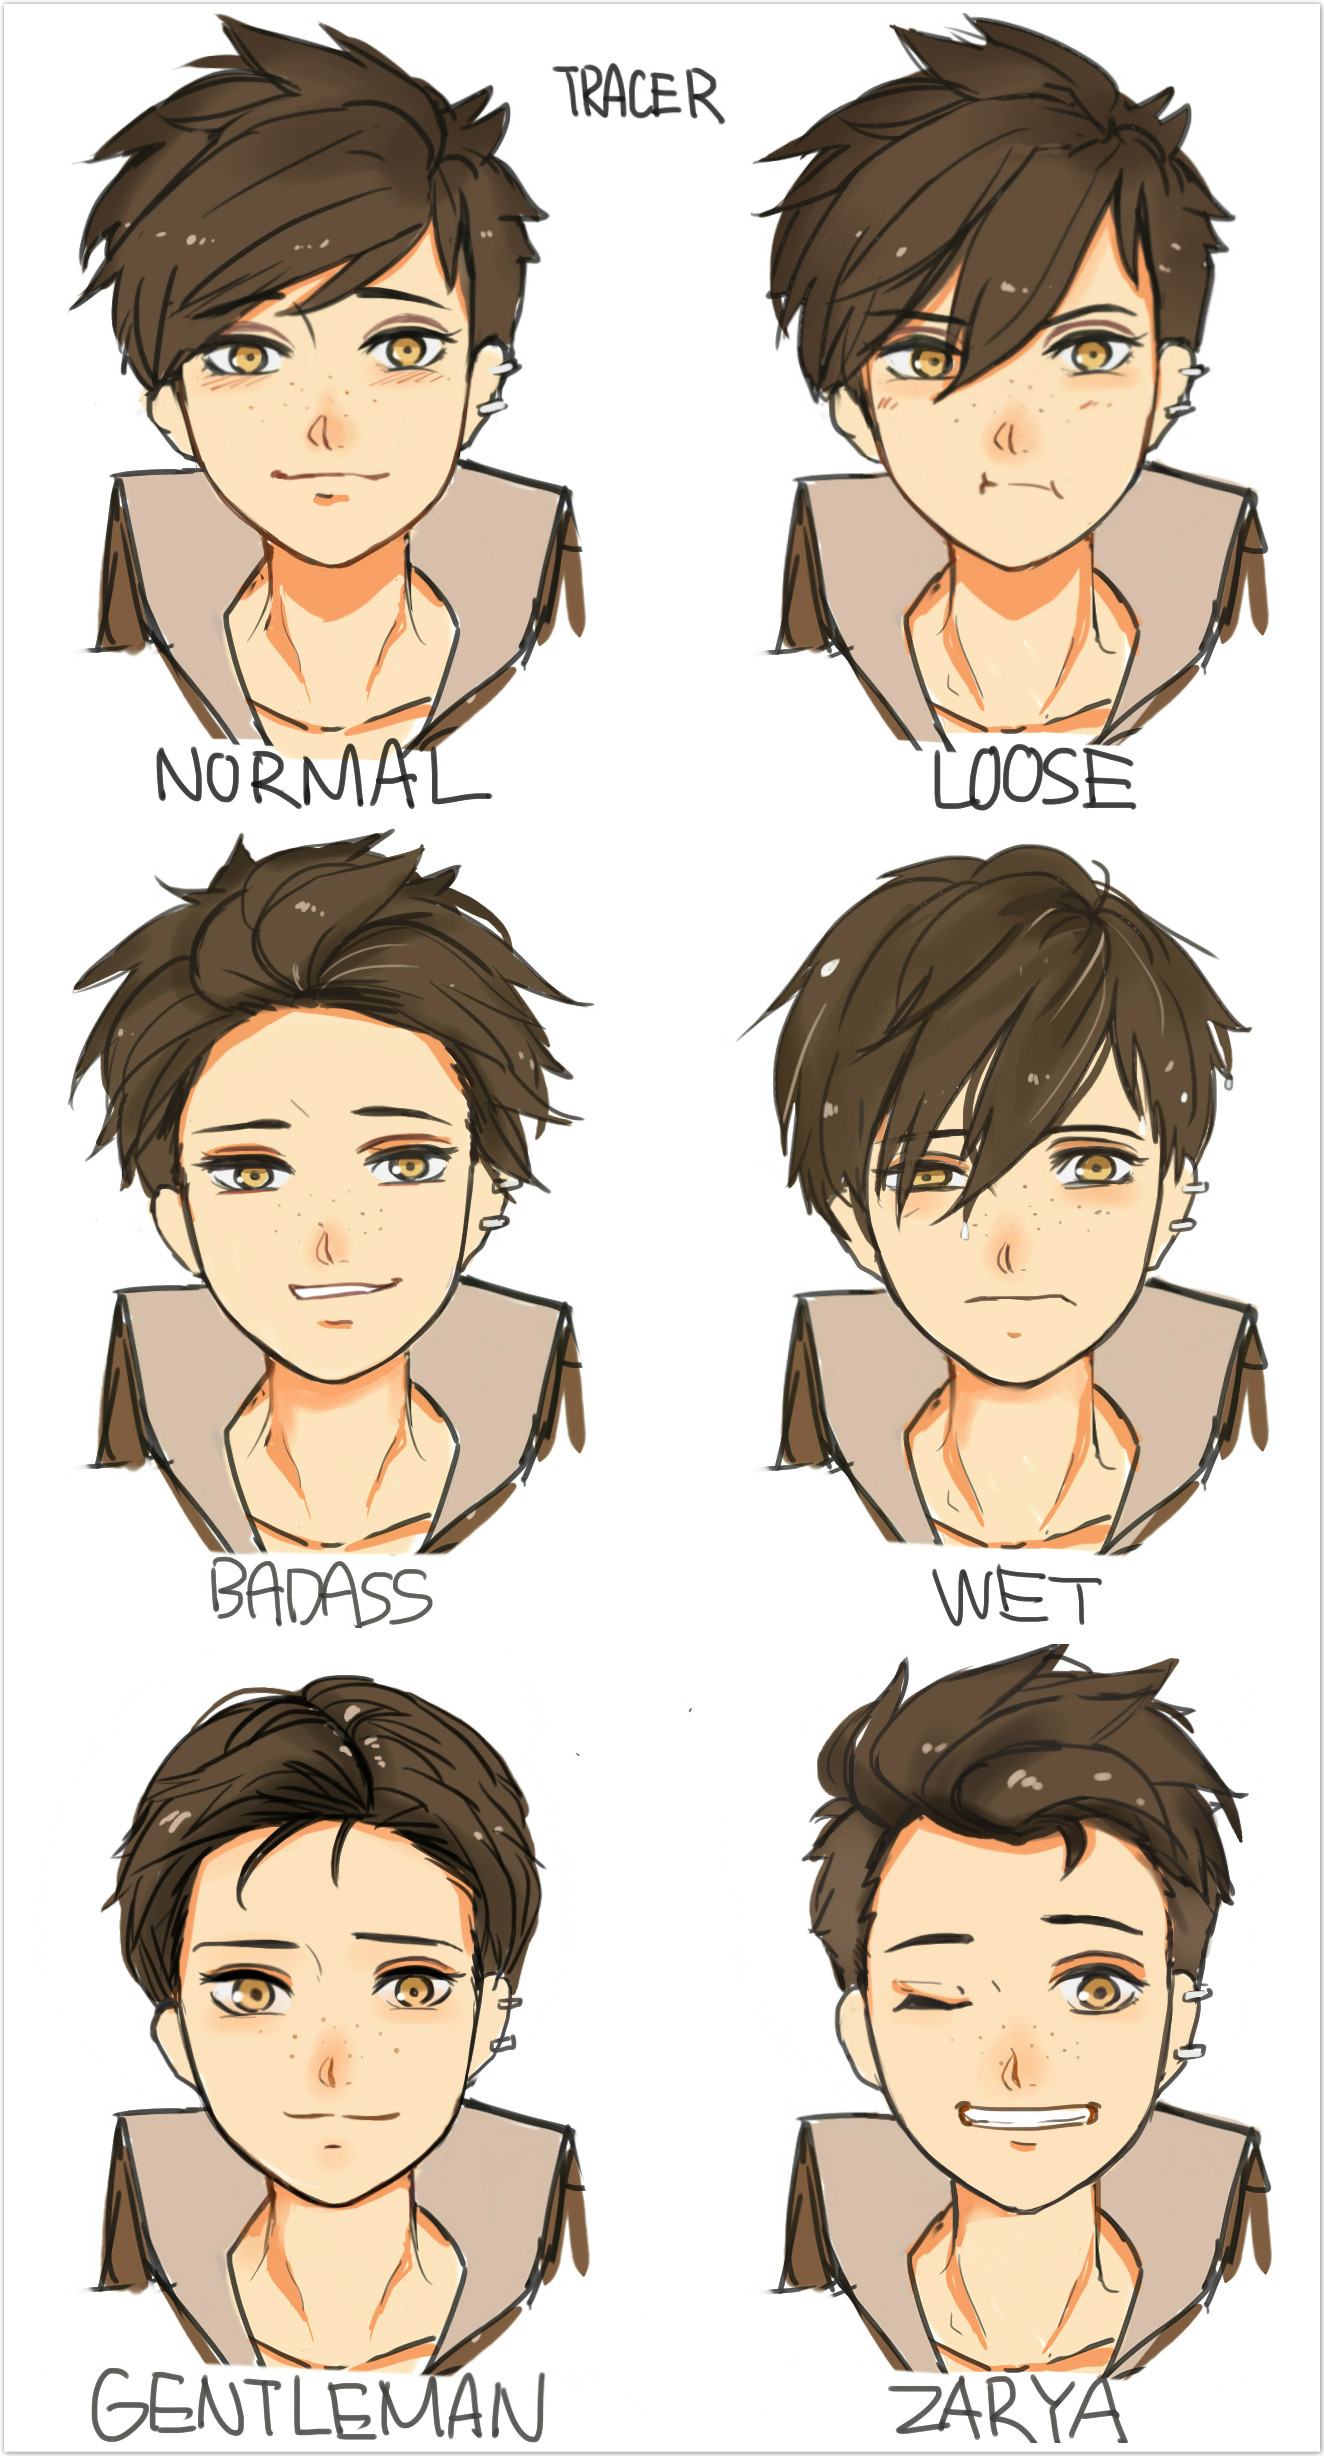 Boy Hairstyles Drawing
 Tracer Hairstyle by BJMAKI on DeviantArt